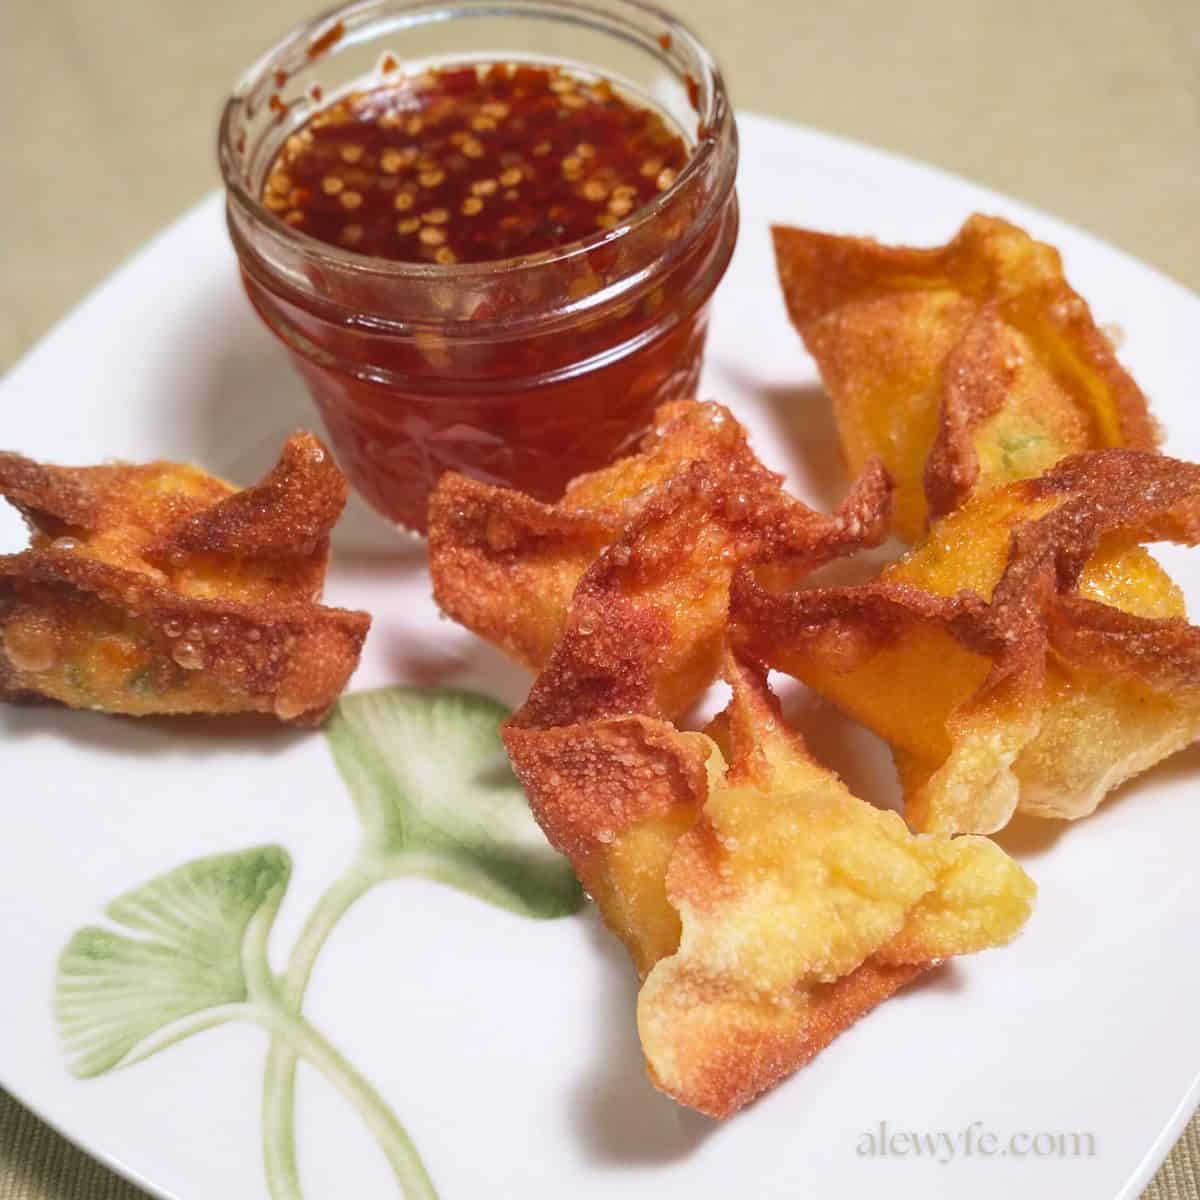 five golden fried jalapeno popper wontons on a plate decorated with a ginko leaf along with a jar of sweet chili garlic dipping sauce.